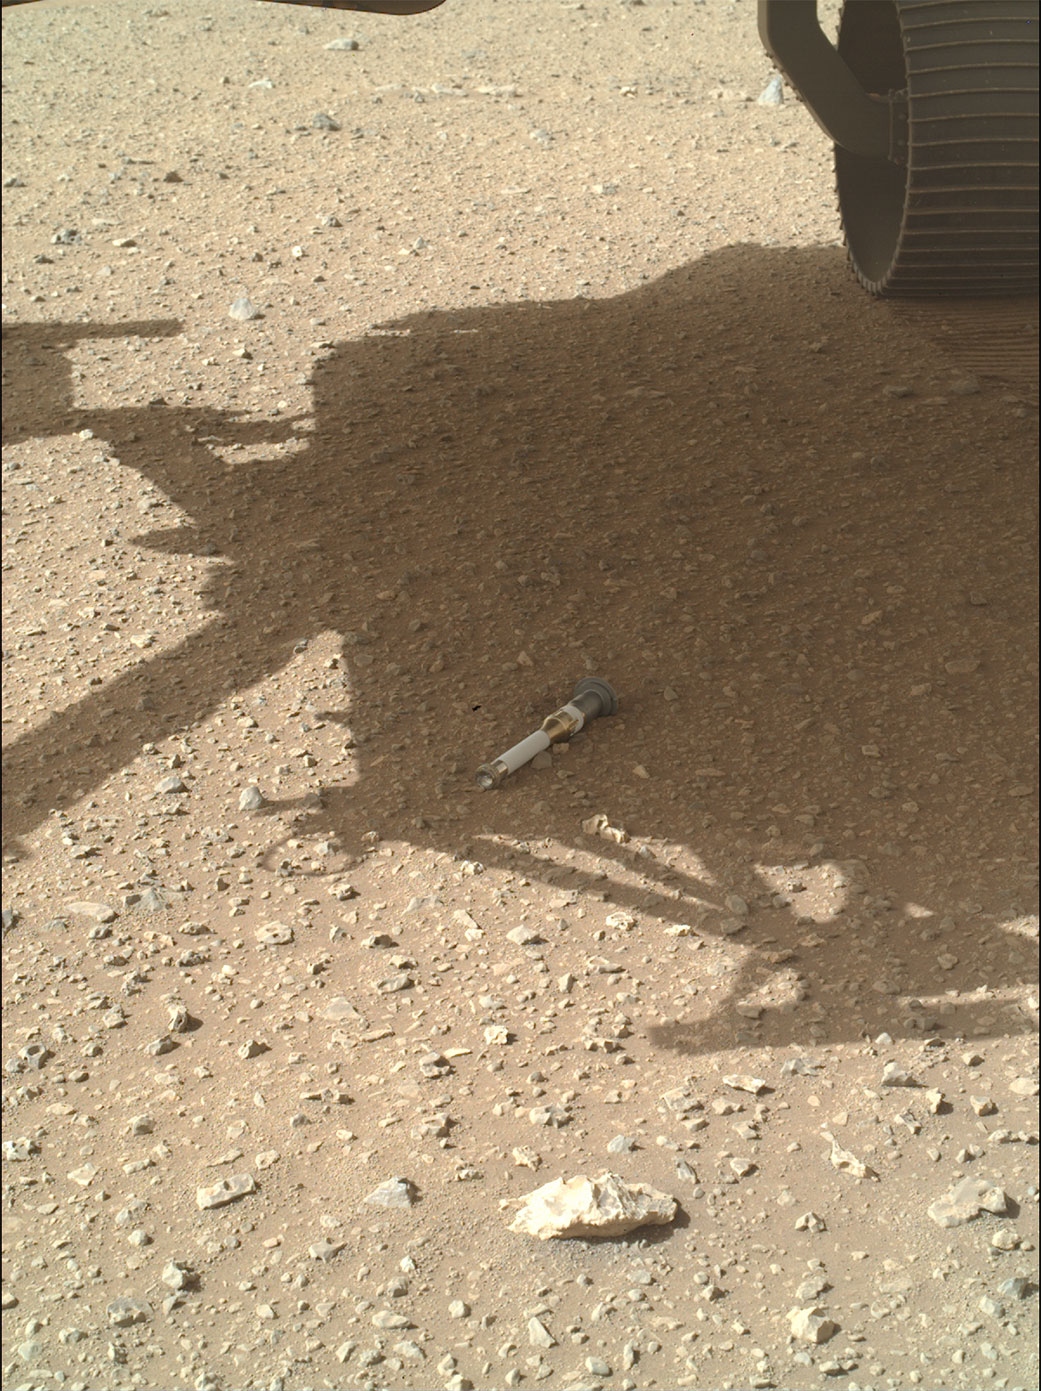 The Perseverance rover’s WATSON camera took this image of the 10th and last tube to be deployed